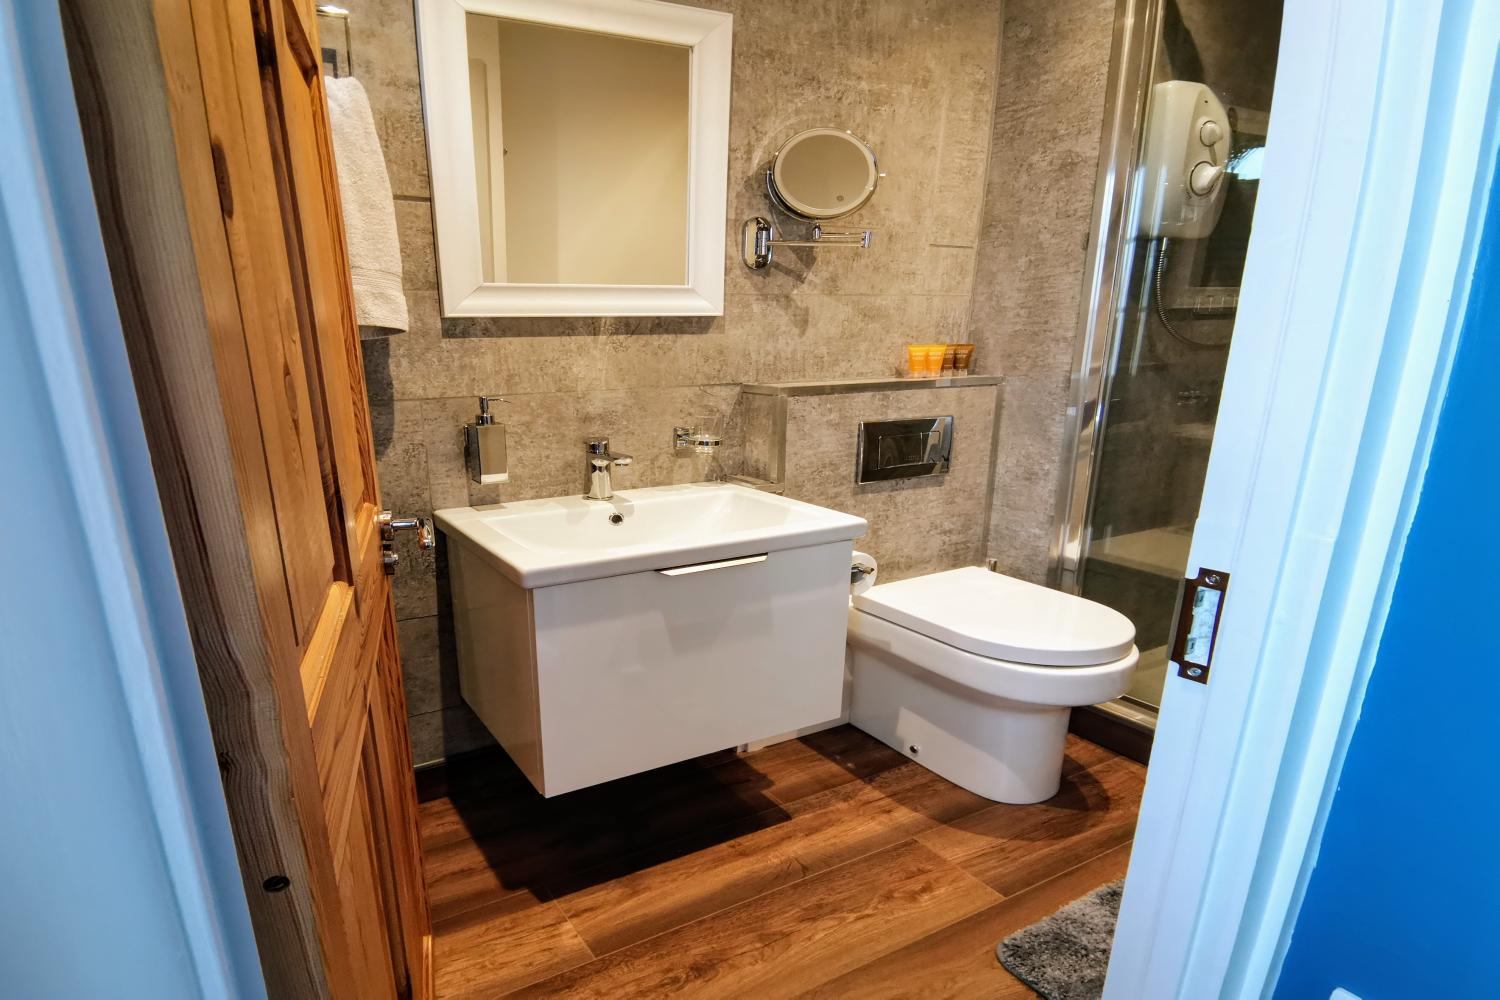 Bathroom with walk-in shower and quality fittings